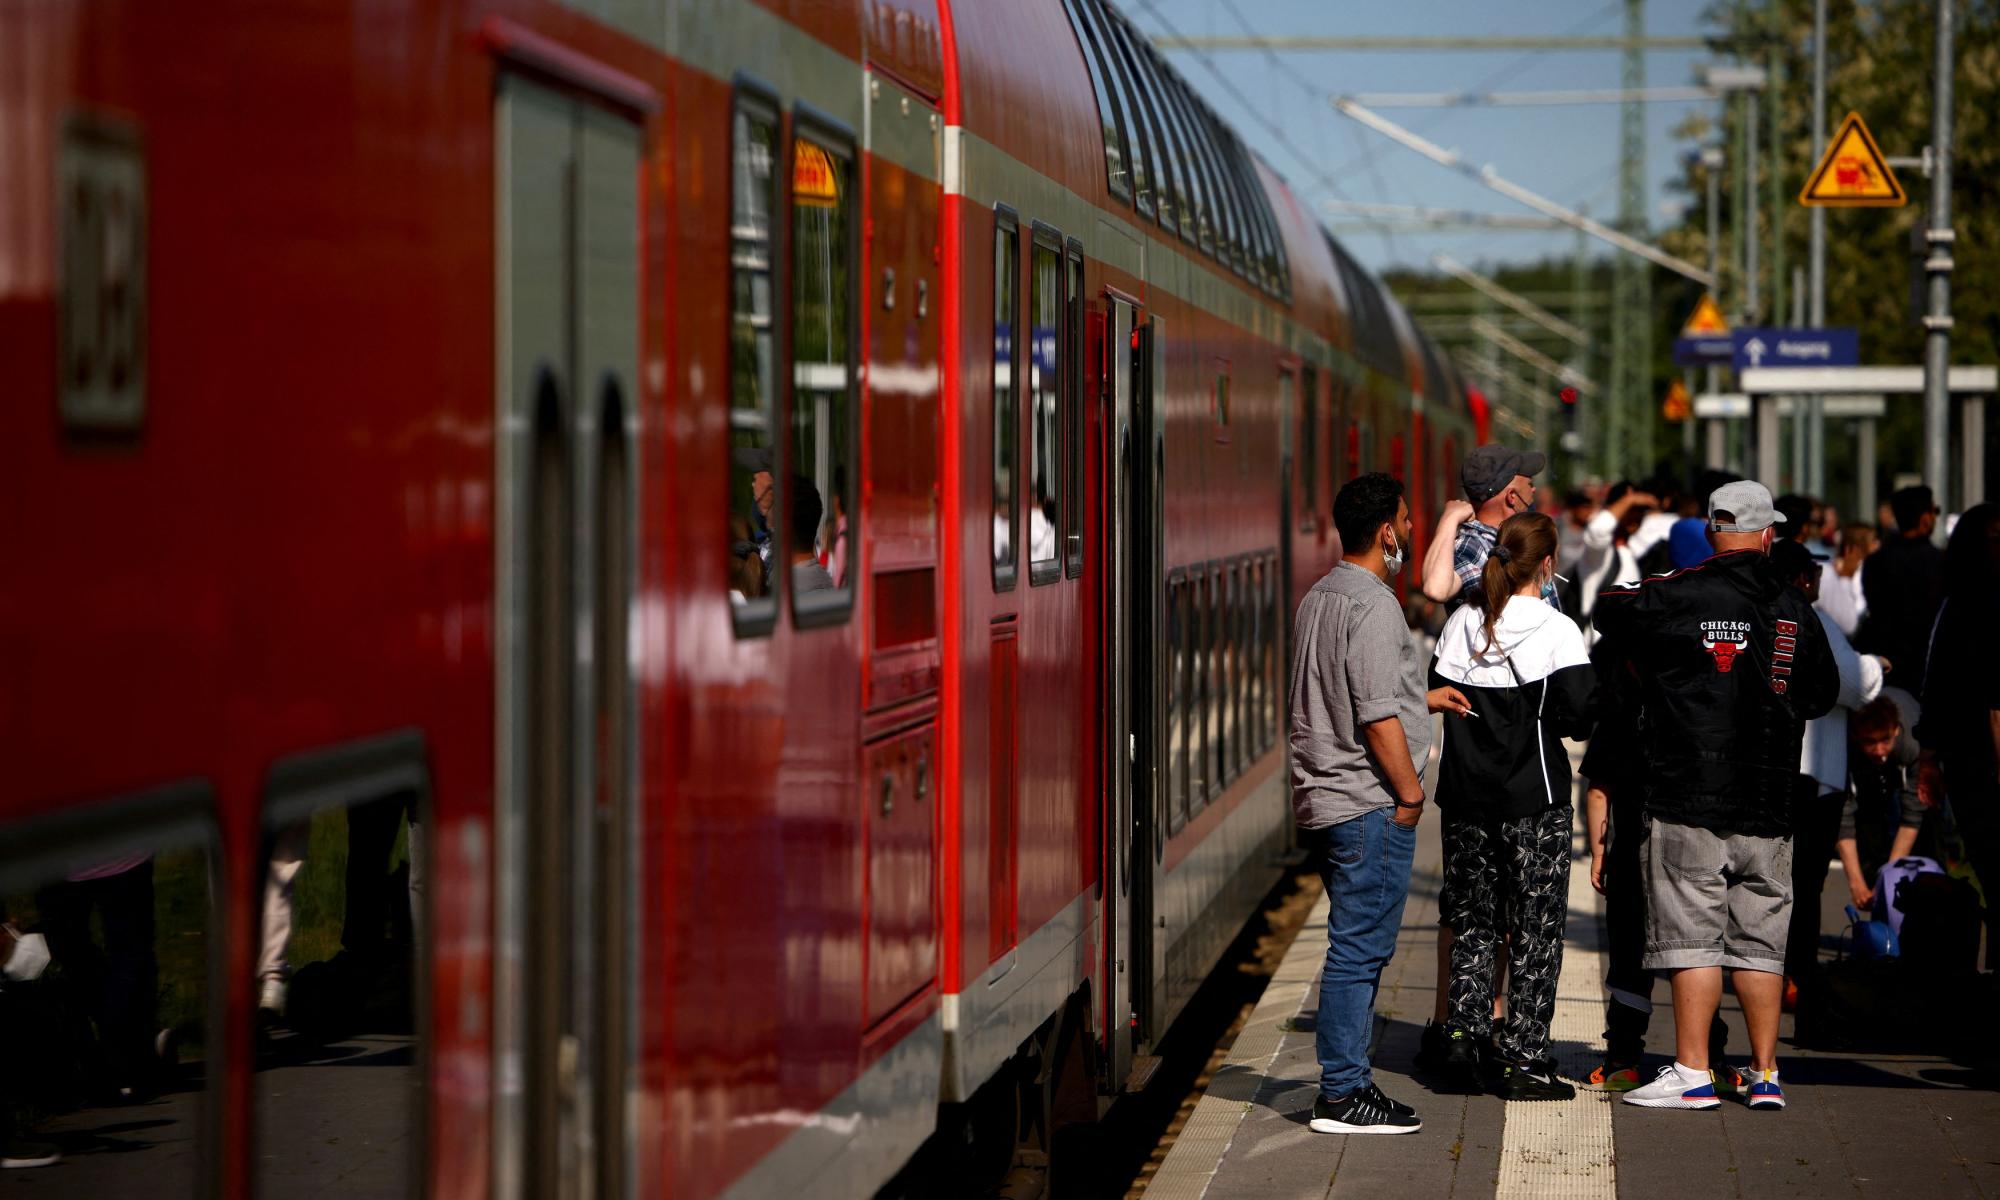 Germany’s €9 train tickets scheme ‘saved 1.8m tons of CO2 emissions’